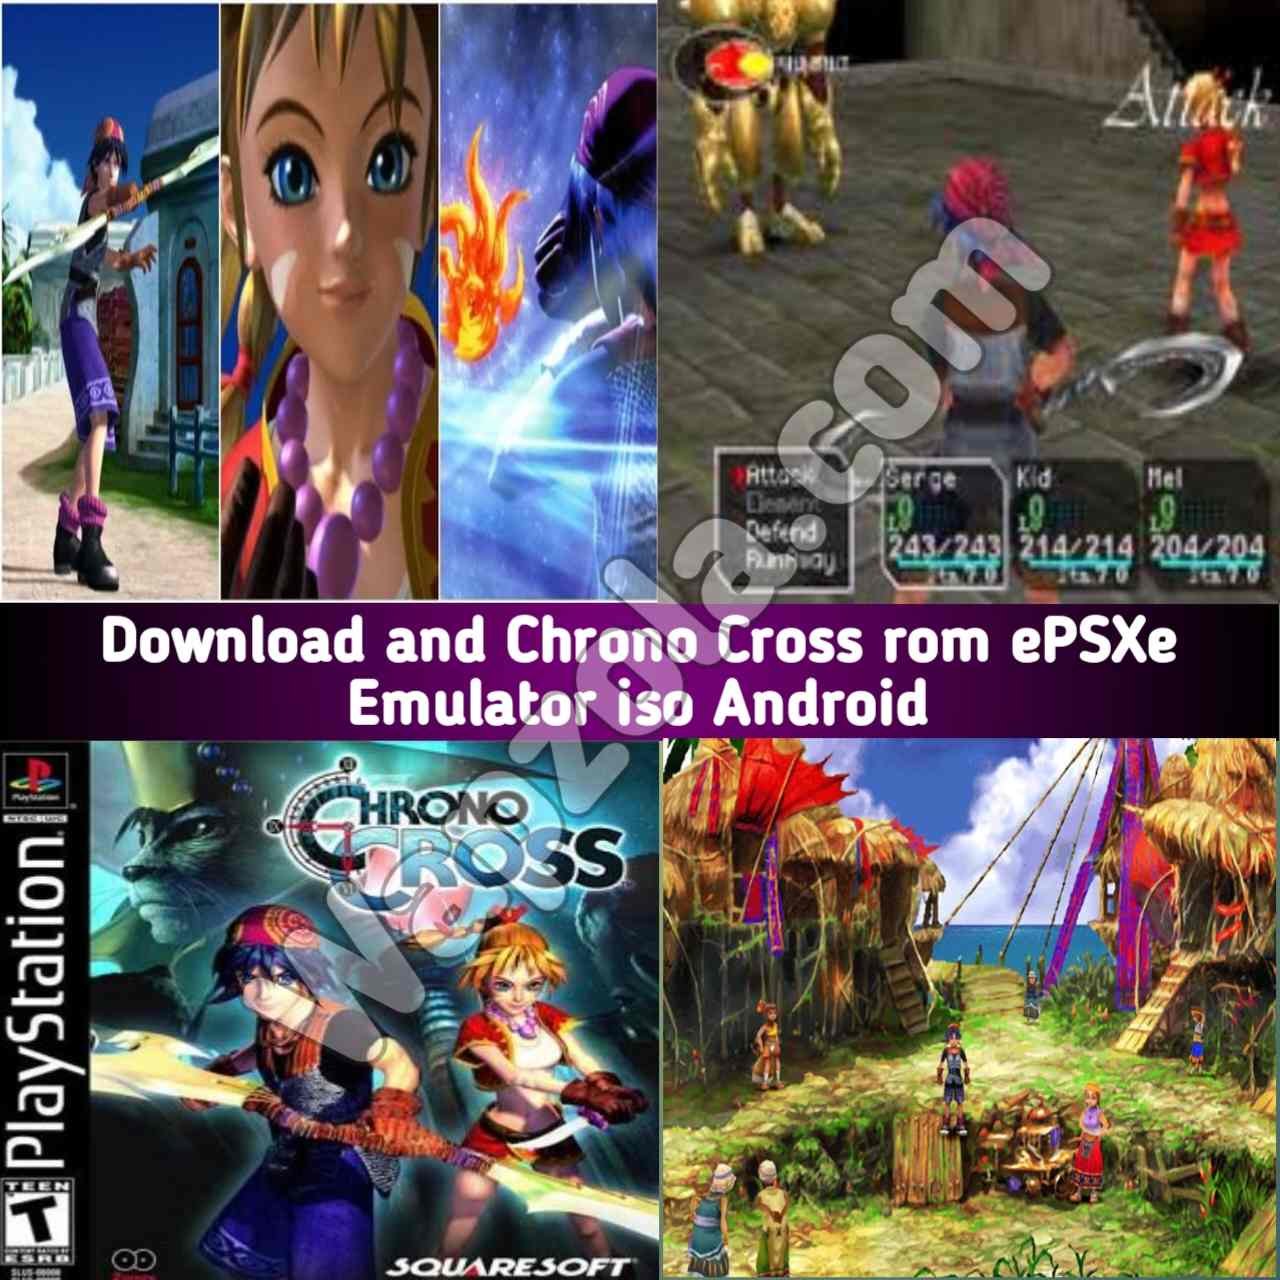 Download] Chrono Cross ROM (ISO) ePSXe and Fpse emulator (362MB/338MB size)  highly compressed – Sony Playstation / PSX / PS1 APK BIN/CUE play on  Android and pc - Wapzola